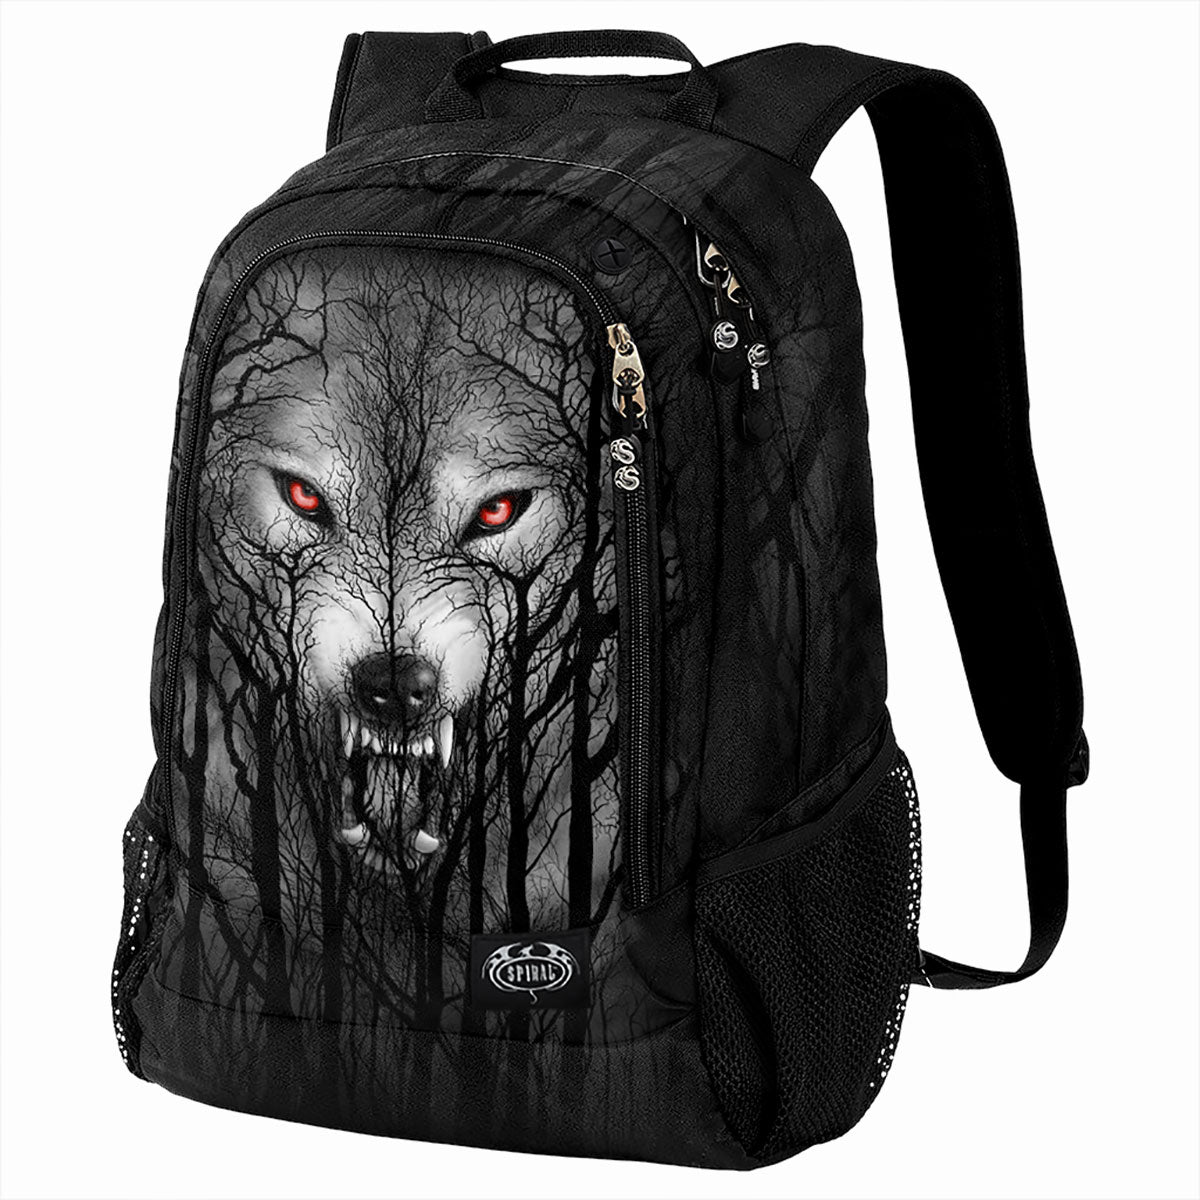 FOREST WOLF - Back Pack - With Laptop Pocket